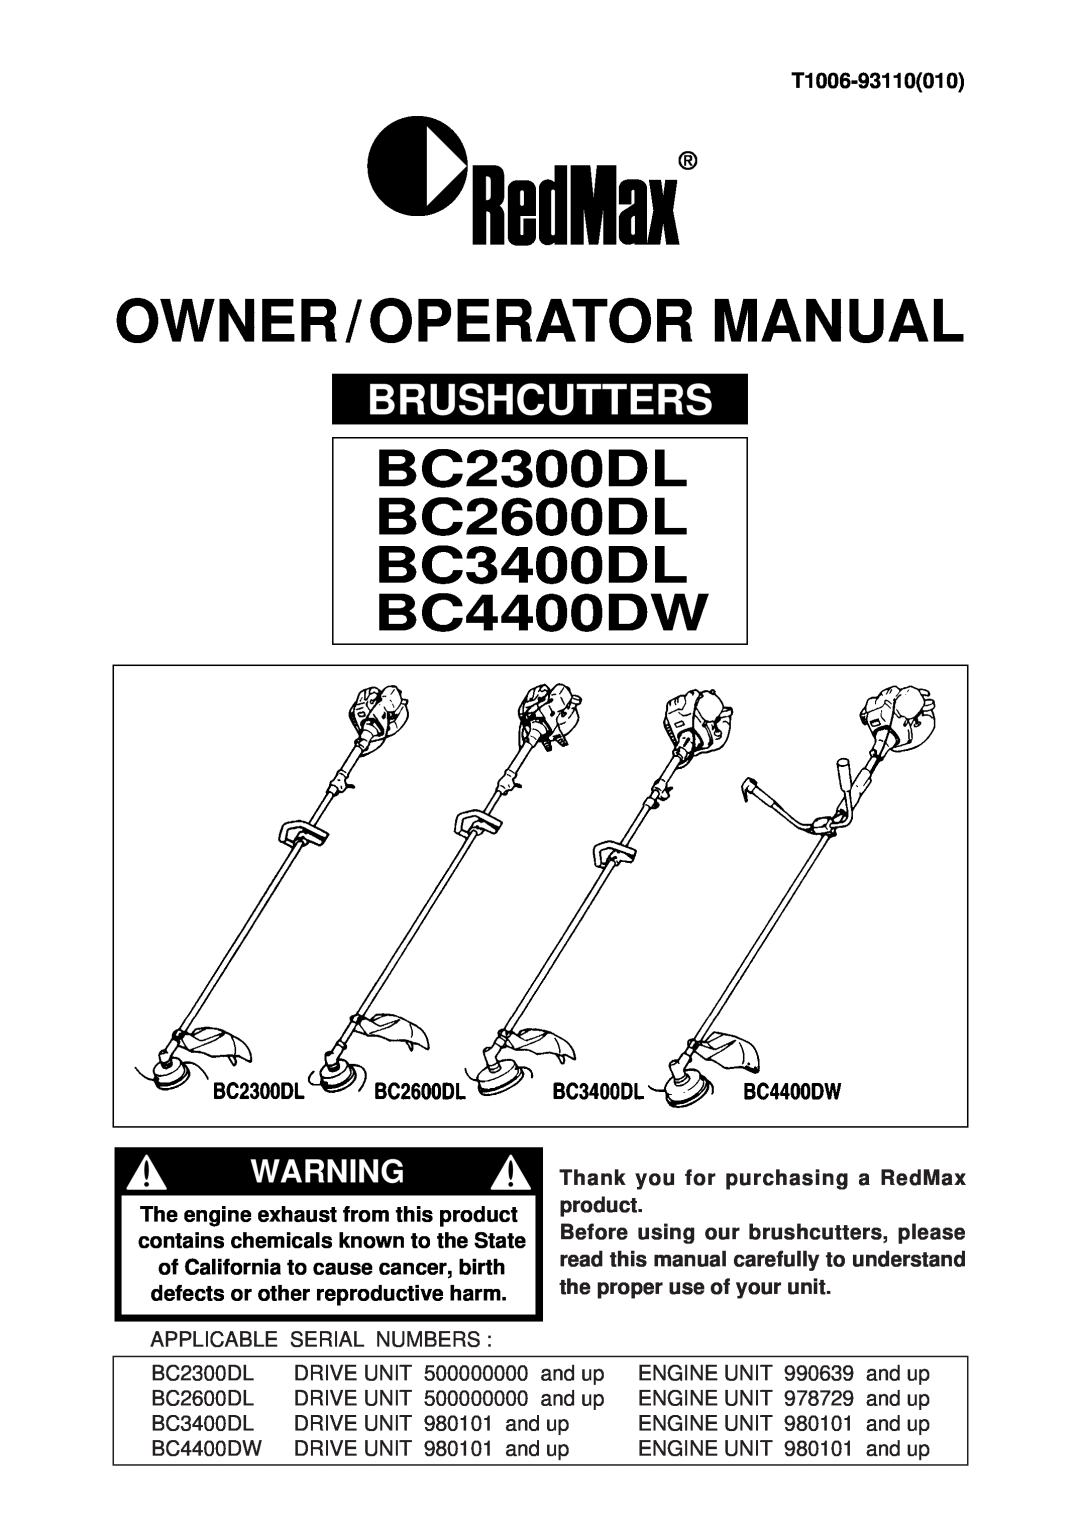 RedMax manual BC2300DL BC2600DL BC3400DL BC4400DW, Brushcutters, Owner / Operator Manual 